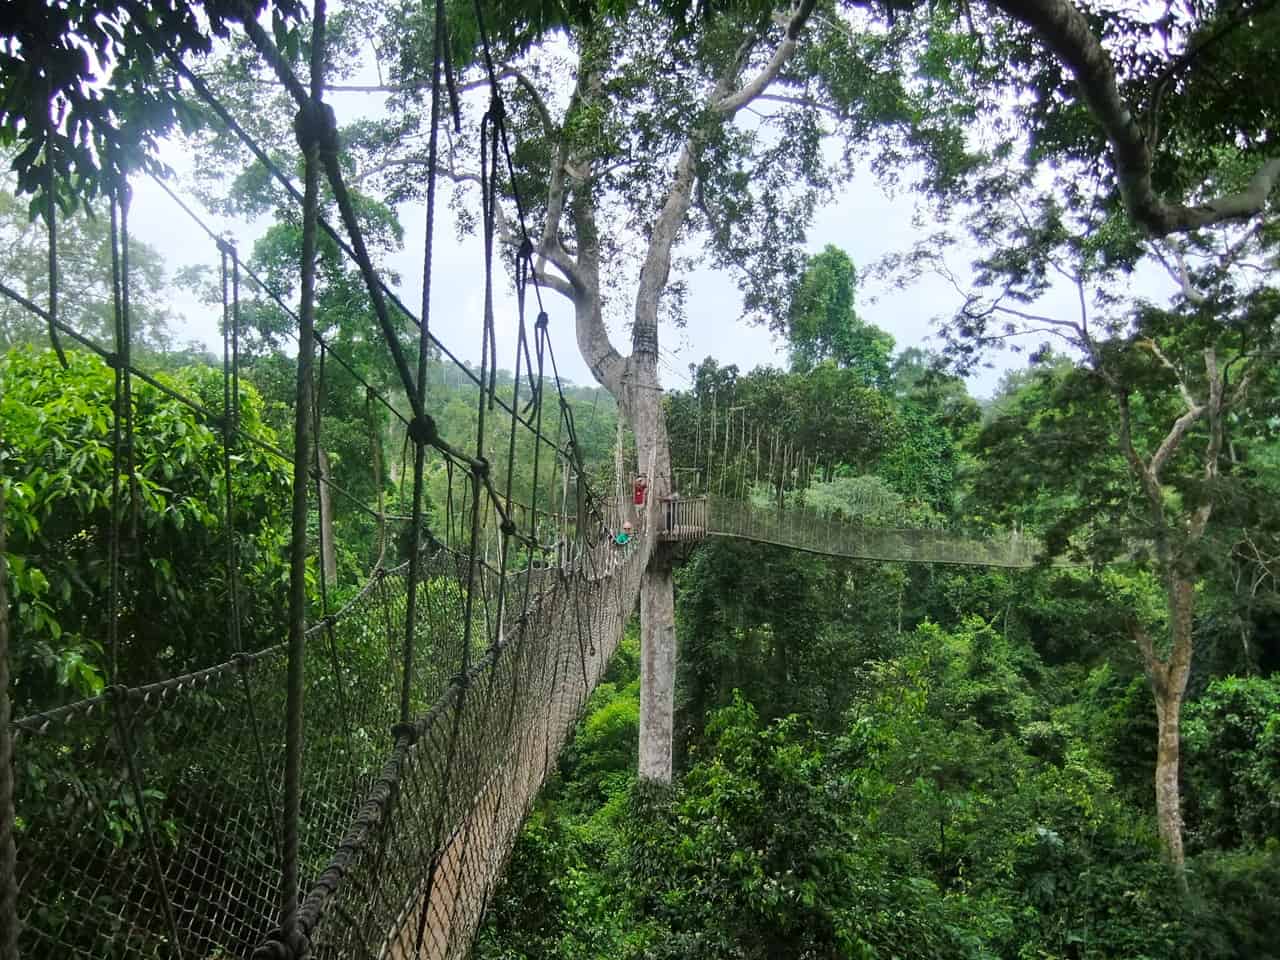 Walk closer to the canopy